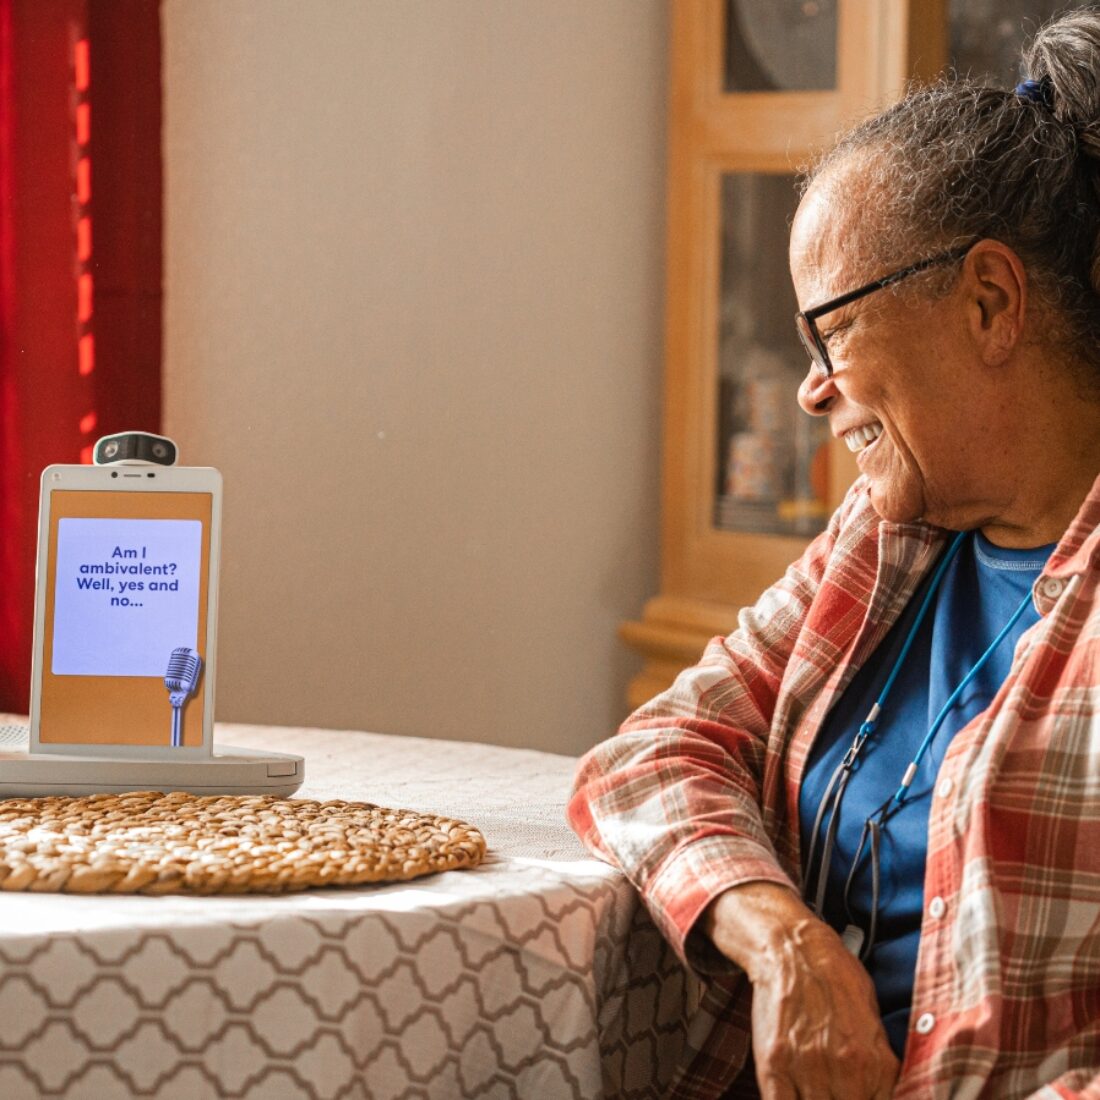 Elders use ElliQ for companionship, communication and health reminders. Photo courtesy of Intuition Robotics